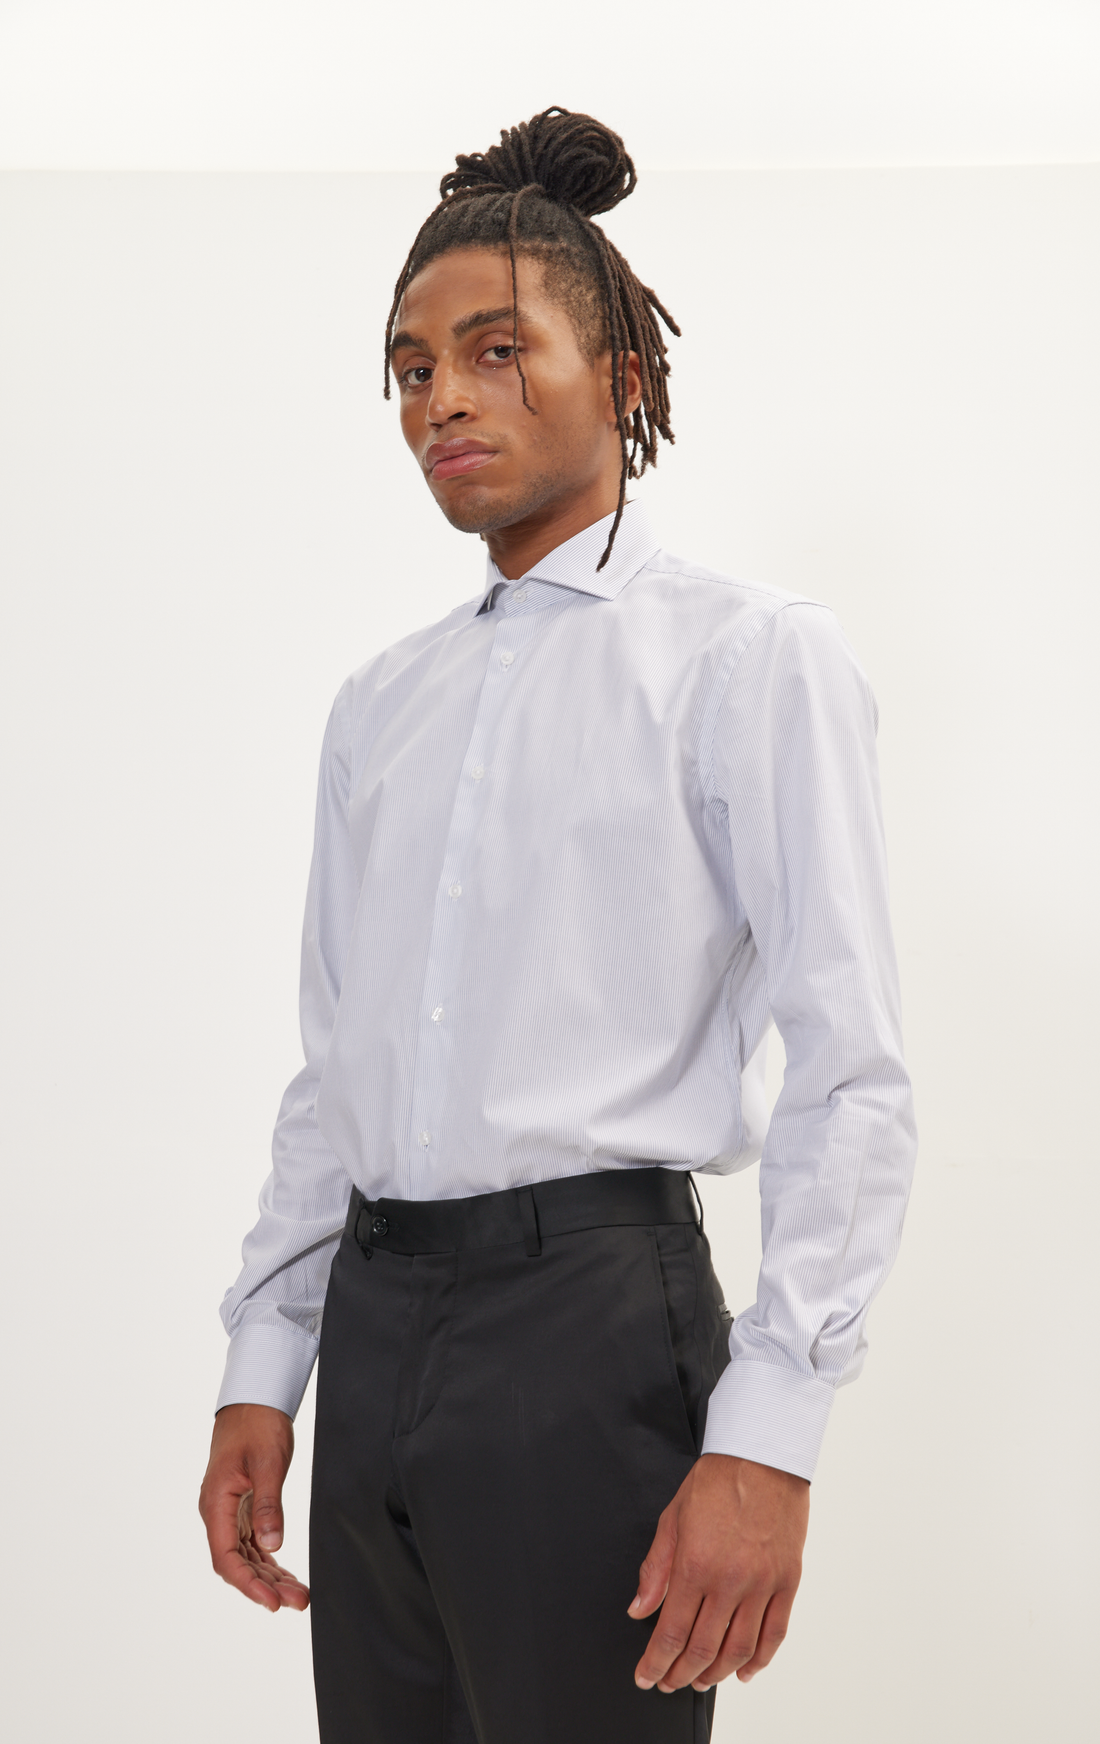 N° AN4902 PURE COTTON FRENCH PLACKET SPREAD COLLAR DRESS SHIRT - WHITE NAVY TWILL